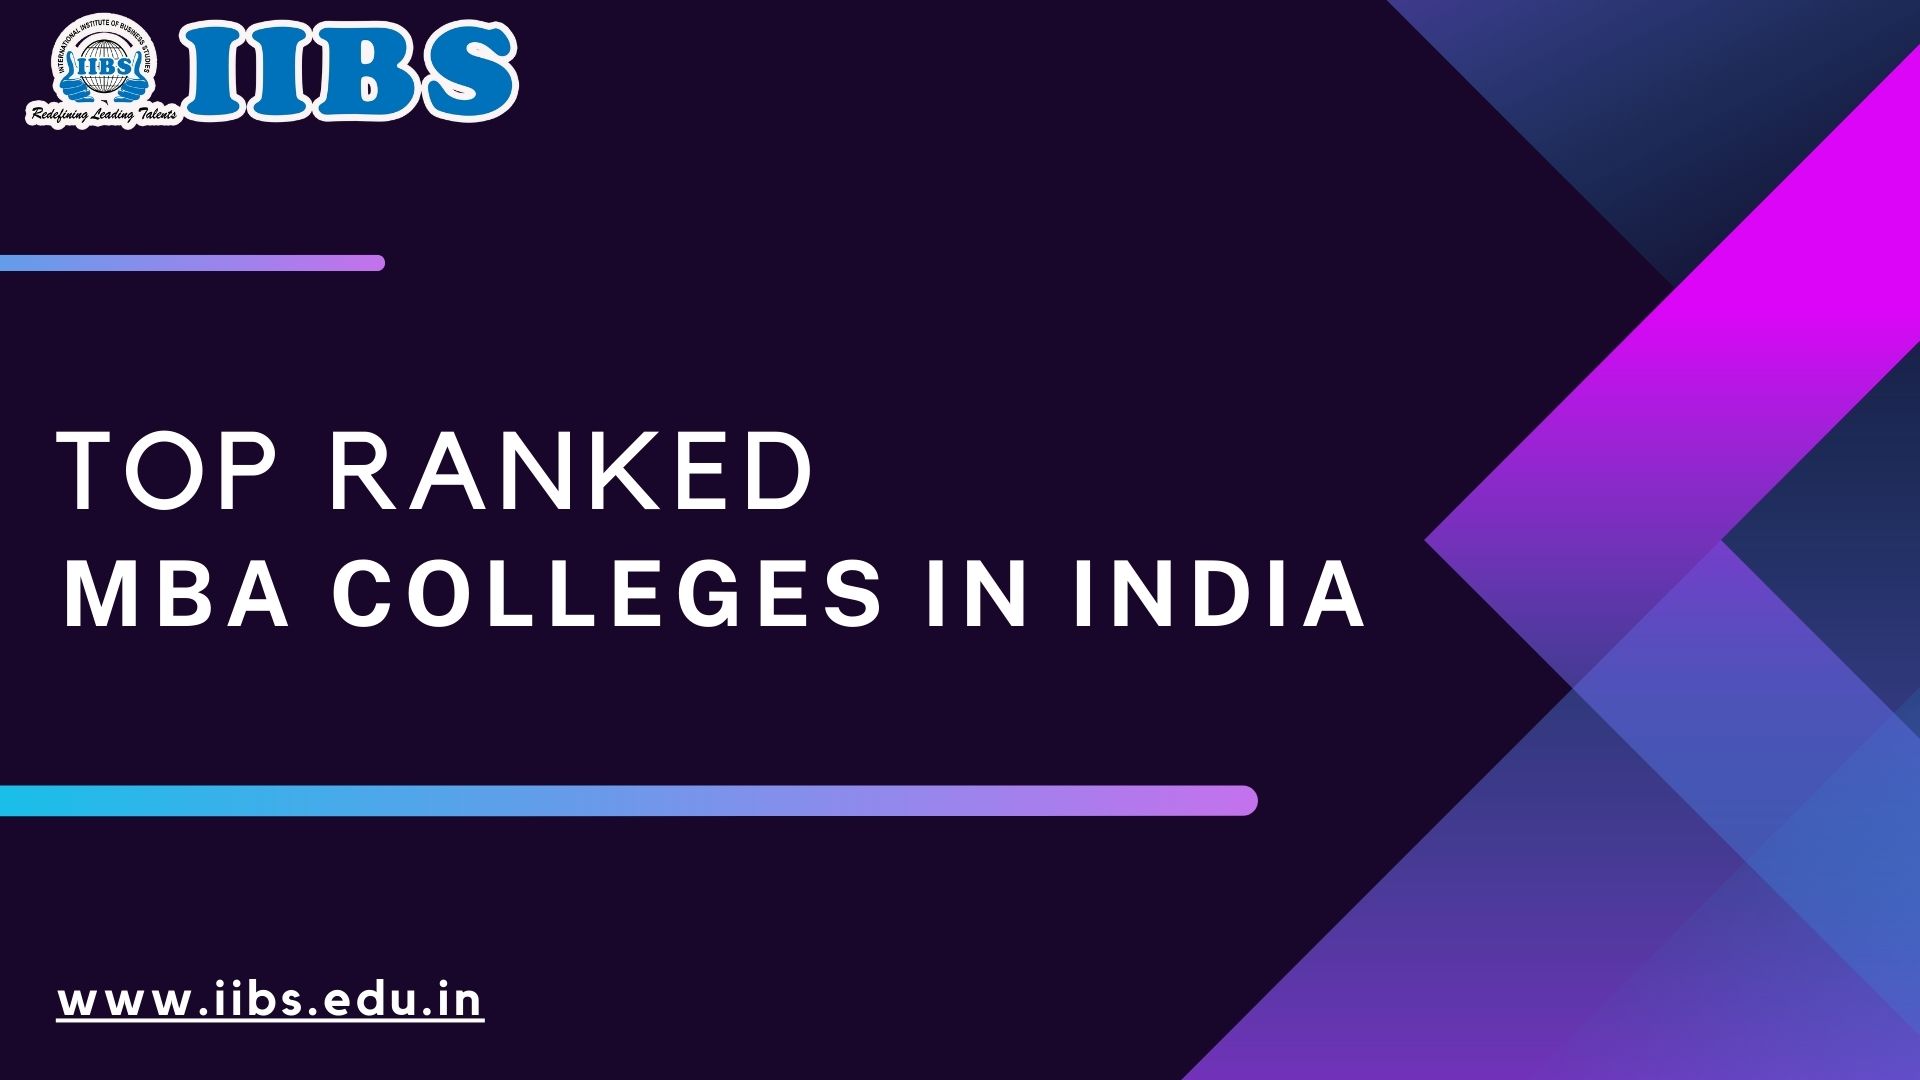 Stepping Stones to be Top Ranked MBA Colleges in India